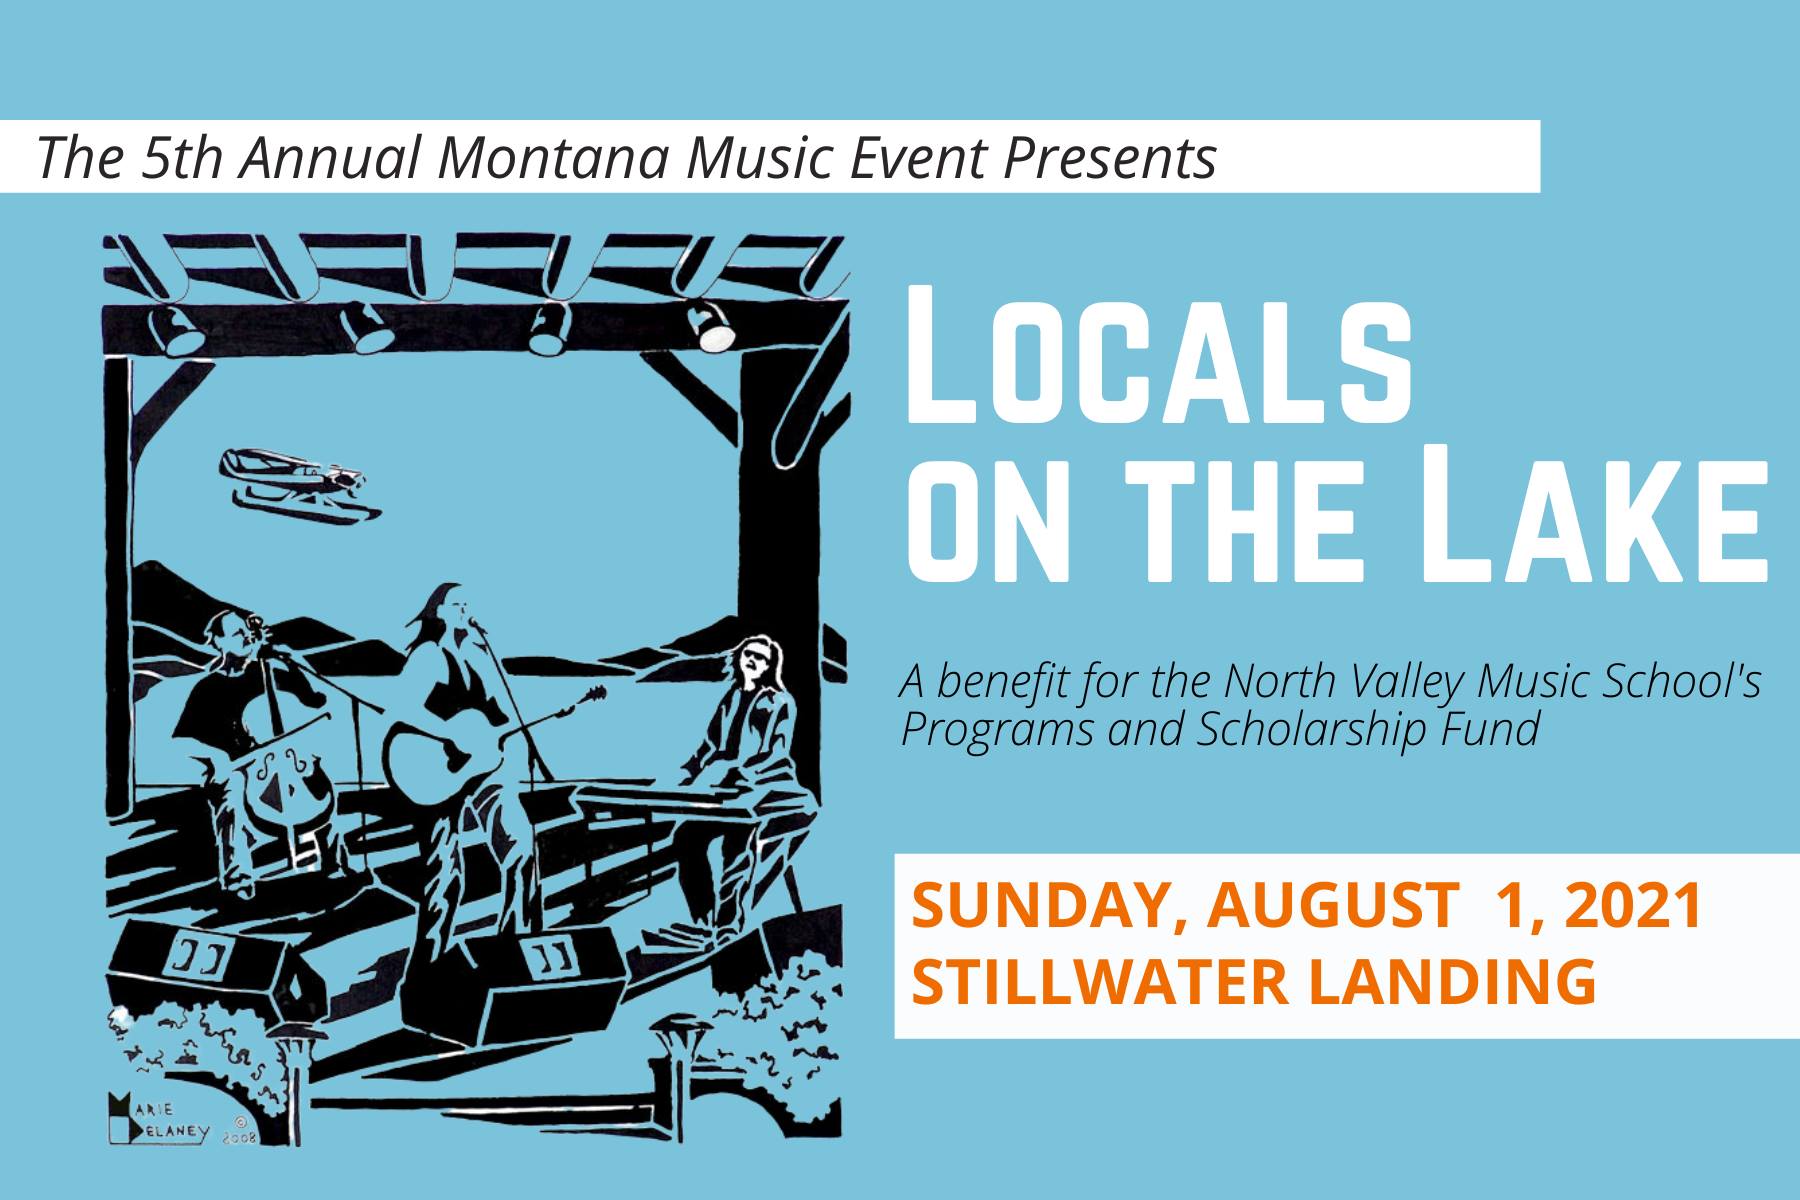 The Montana Music Event presents Locals on the Lake